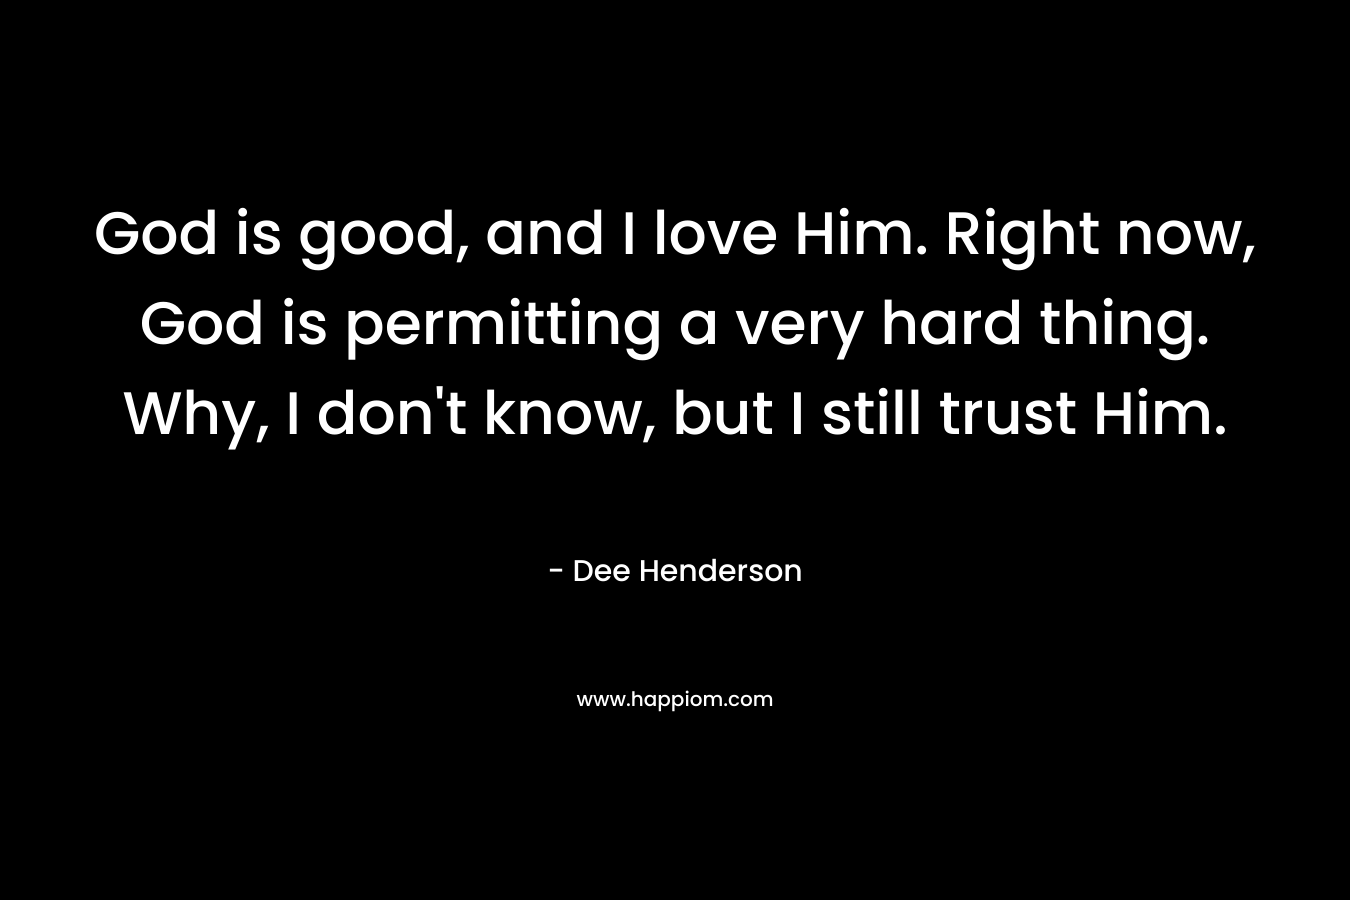 God is good, and I love Him. Right now, God is permitting a very hard thing. Why, I don’t know, but I still trust Him. – Dee Henderson